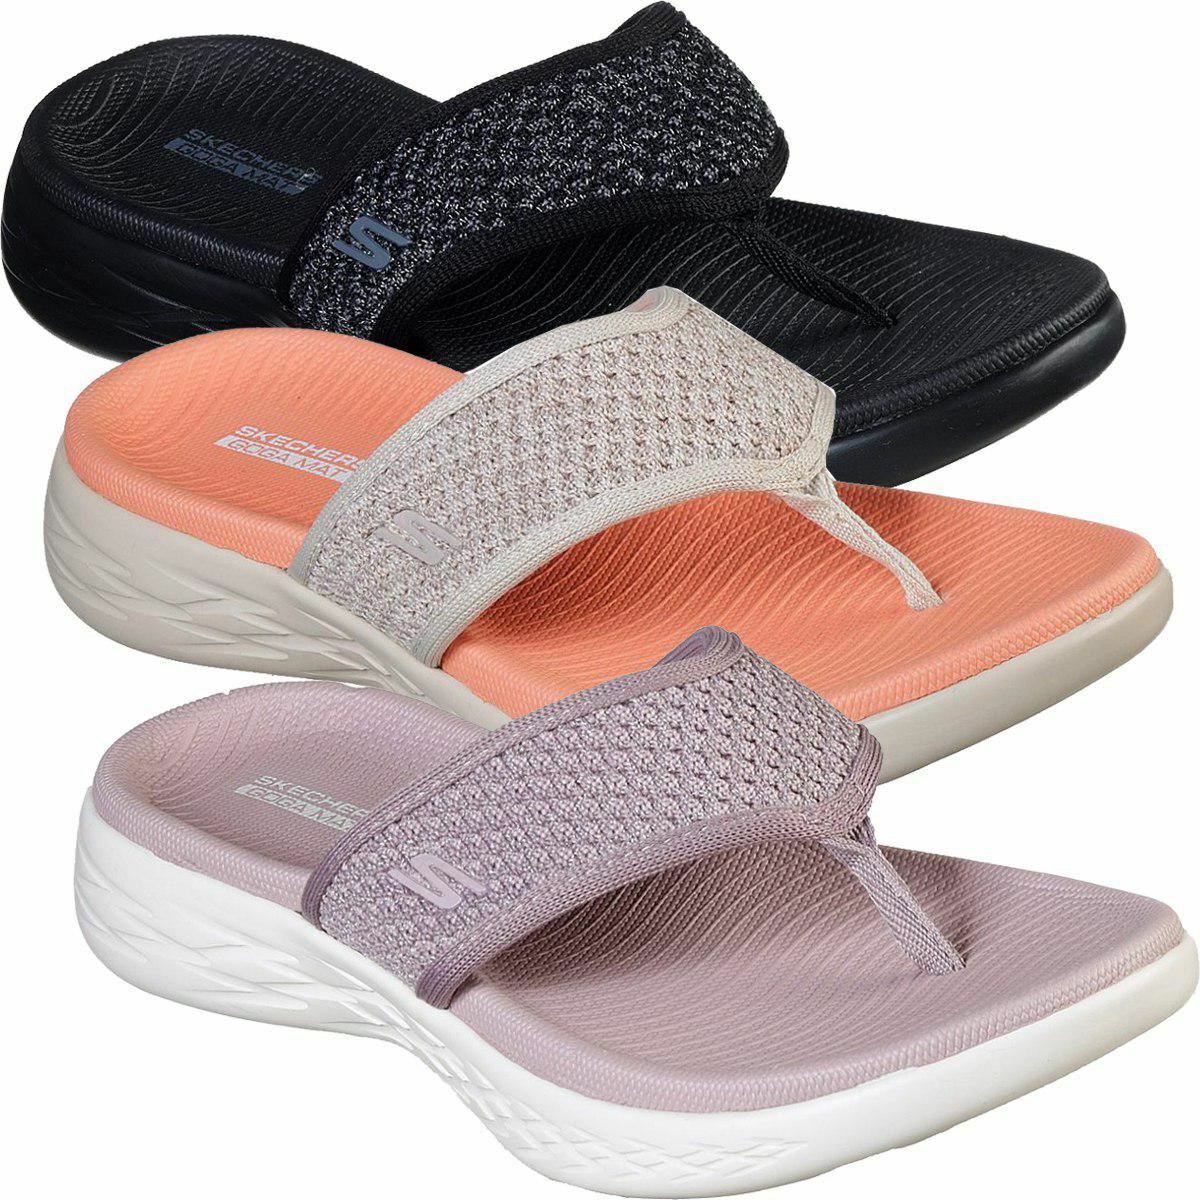 Sandals Women&#039;s On The GO 600 Glossy Flip-Flop